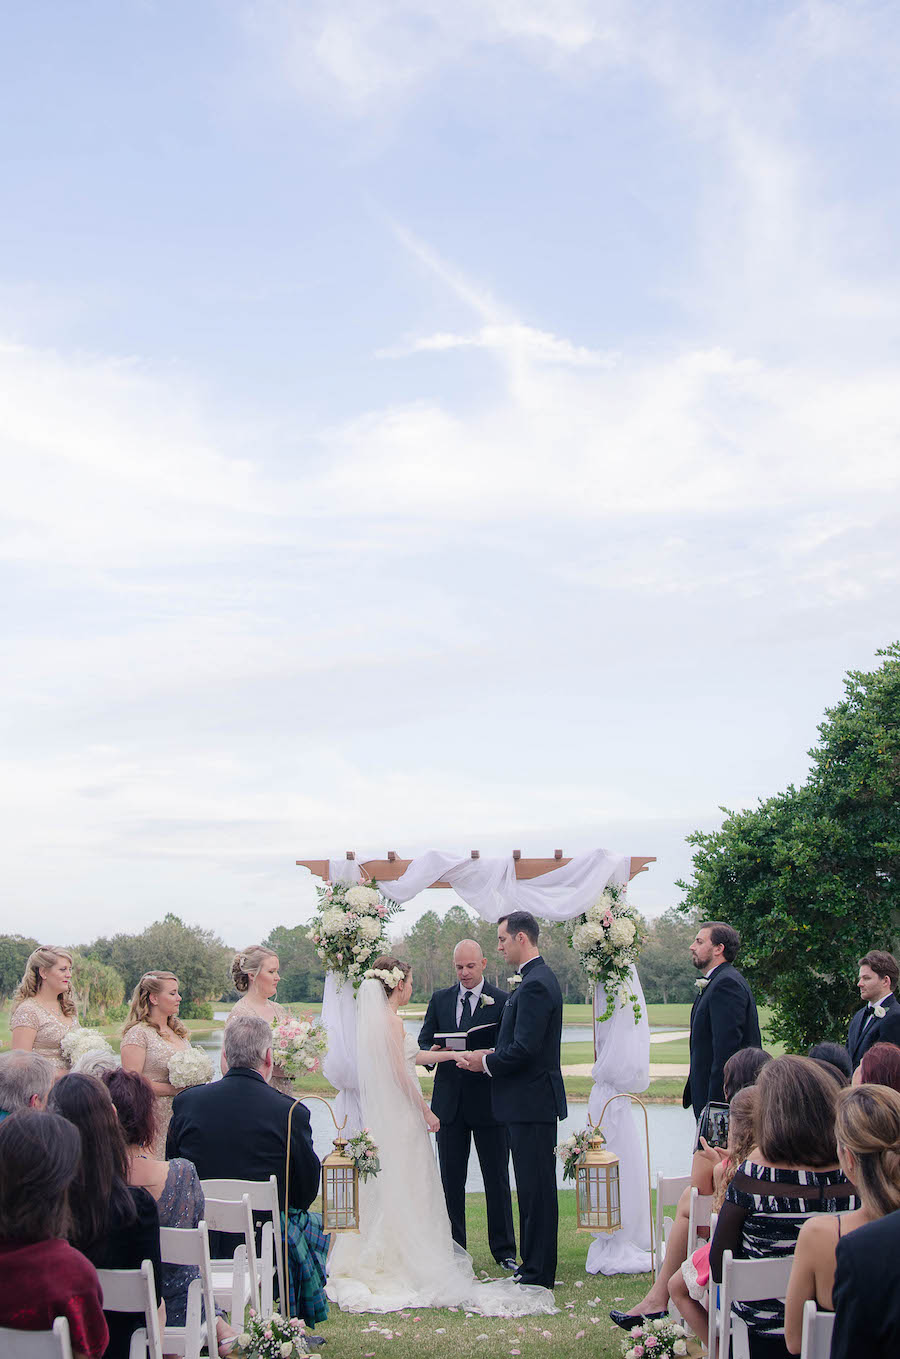 Bride and Groom Outdoor Wedding Ceremony with Arch and Draping | Tampa Wedding Floral Designer Northside Florist | Tampa Country Club Wedding Venue Hunter's Green Country Club